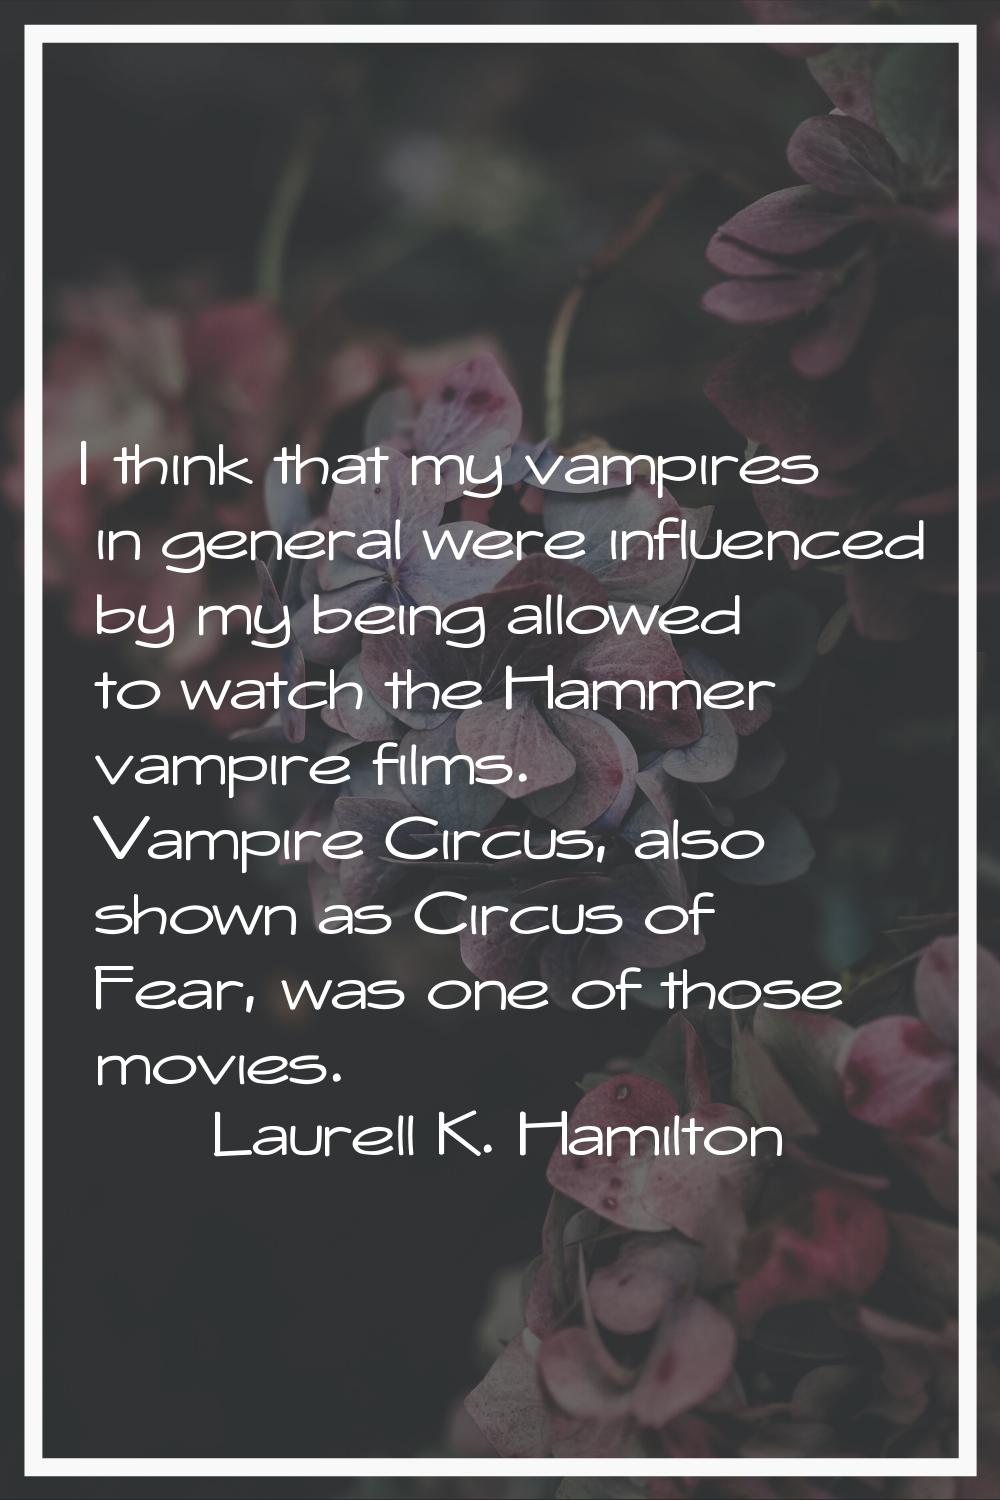 I think that my vampires in general were influenced by my being allowed to watch the Hammer vampire